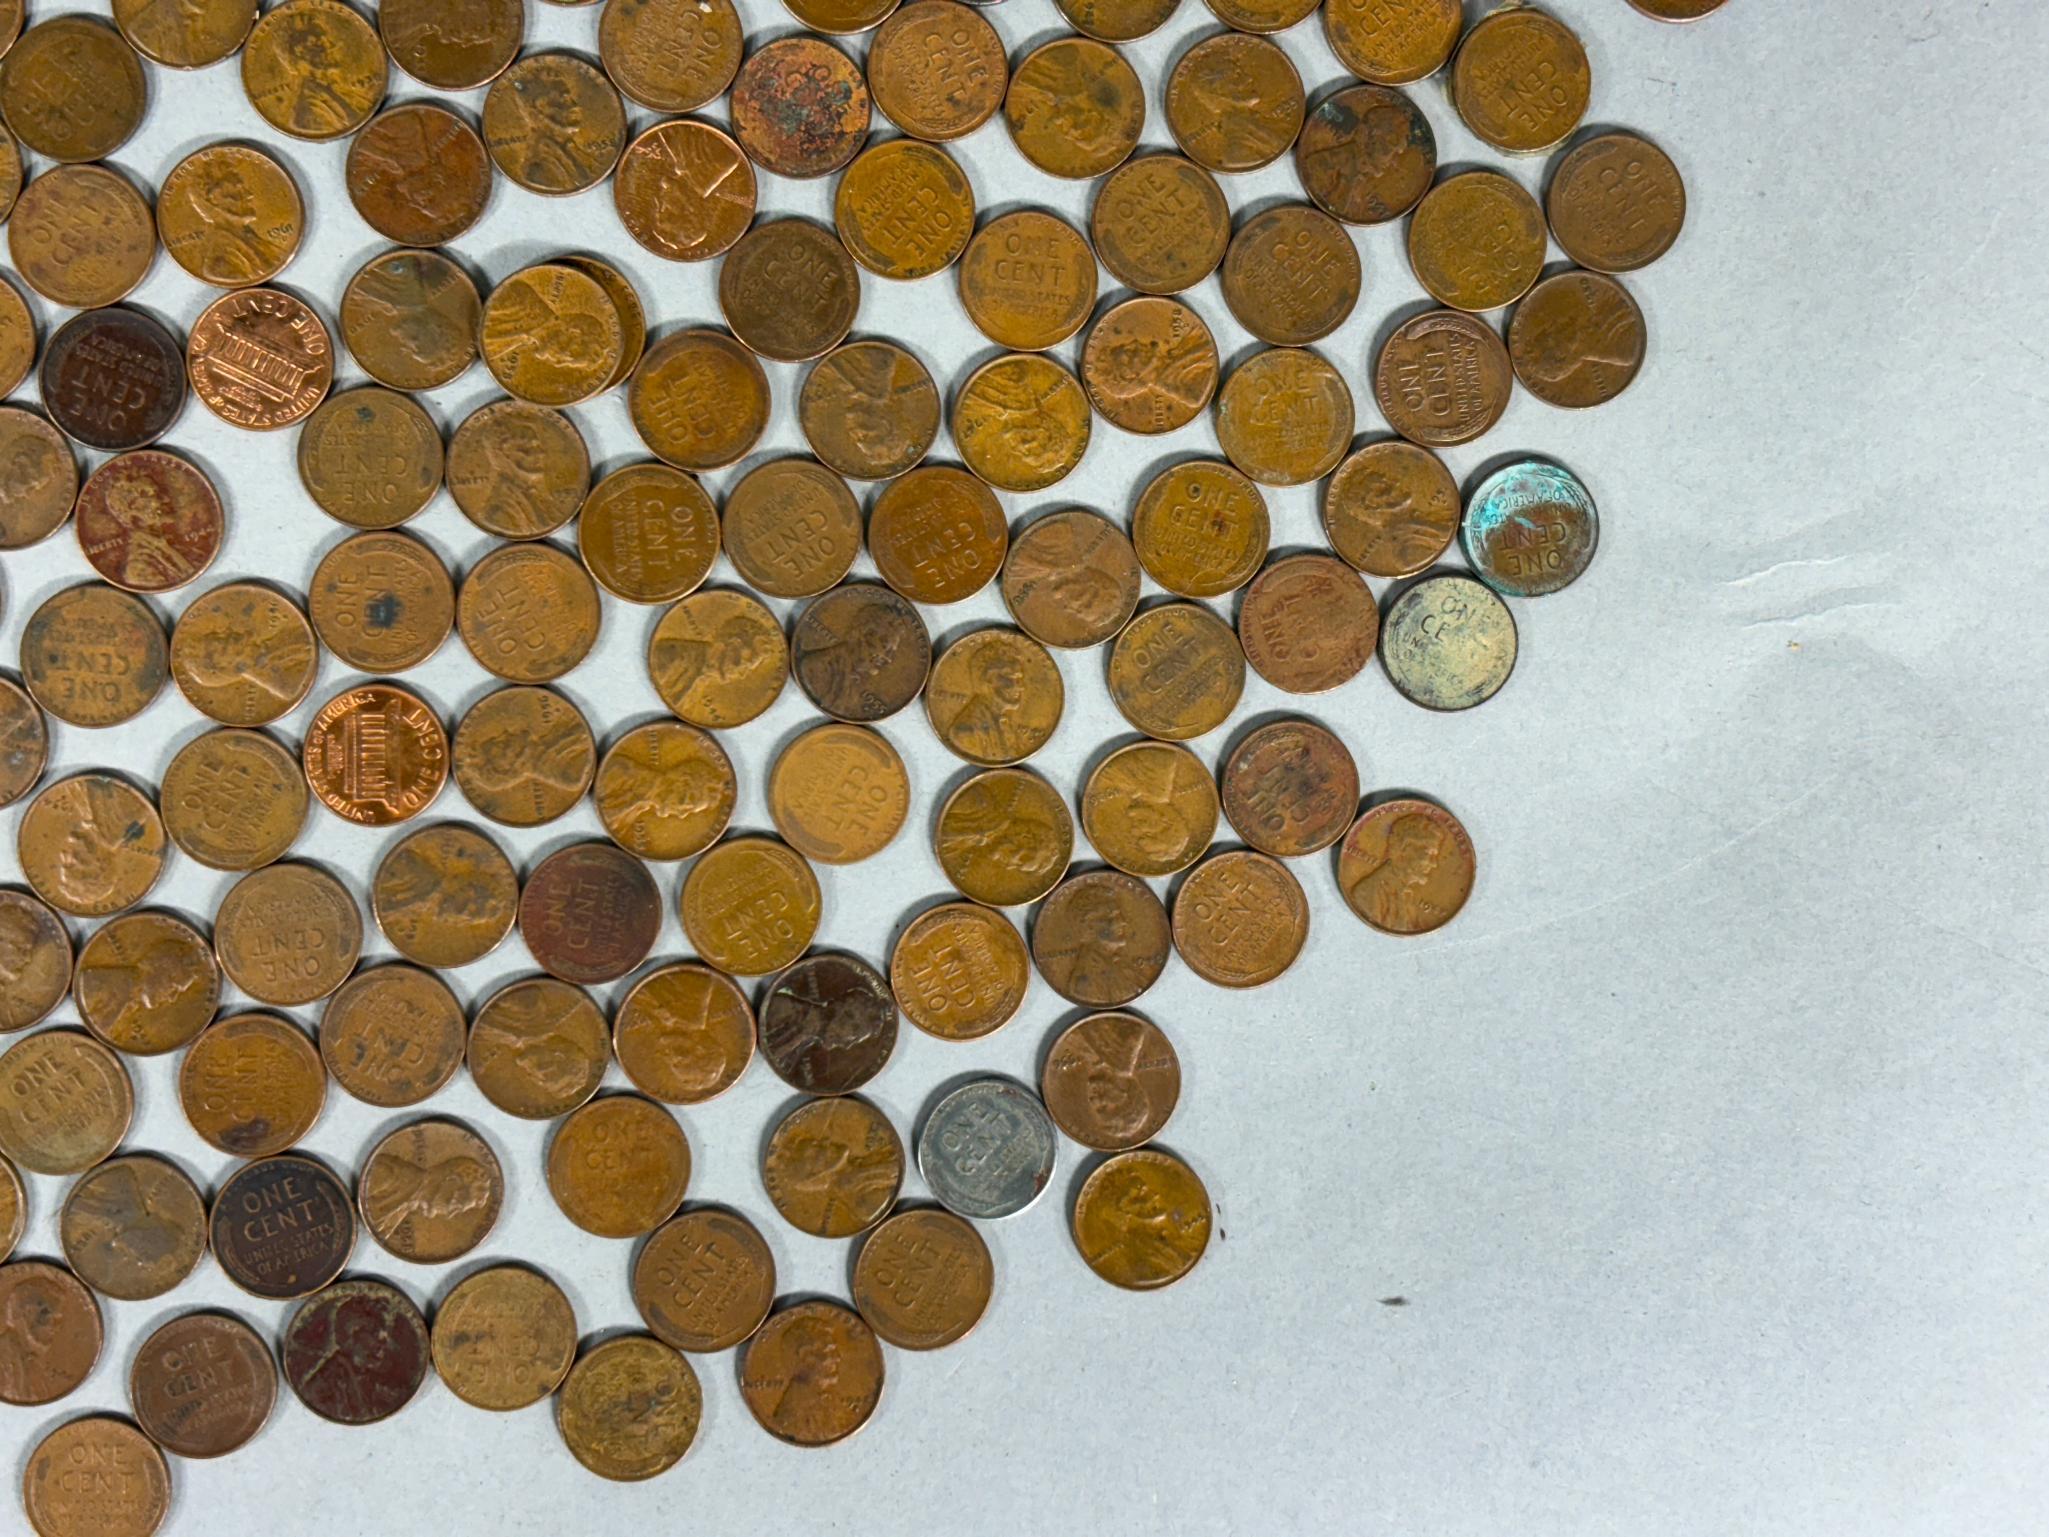 Large Lot of Old Pennies Many Wheat